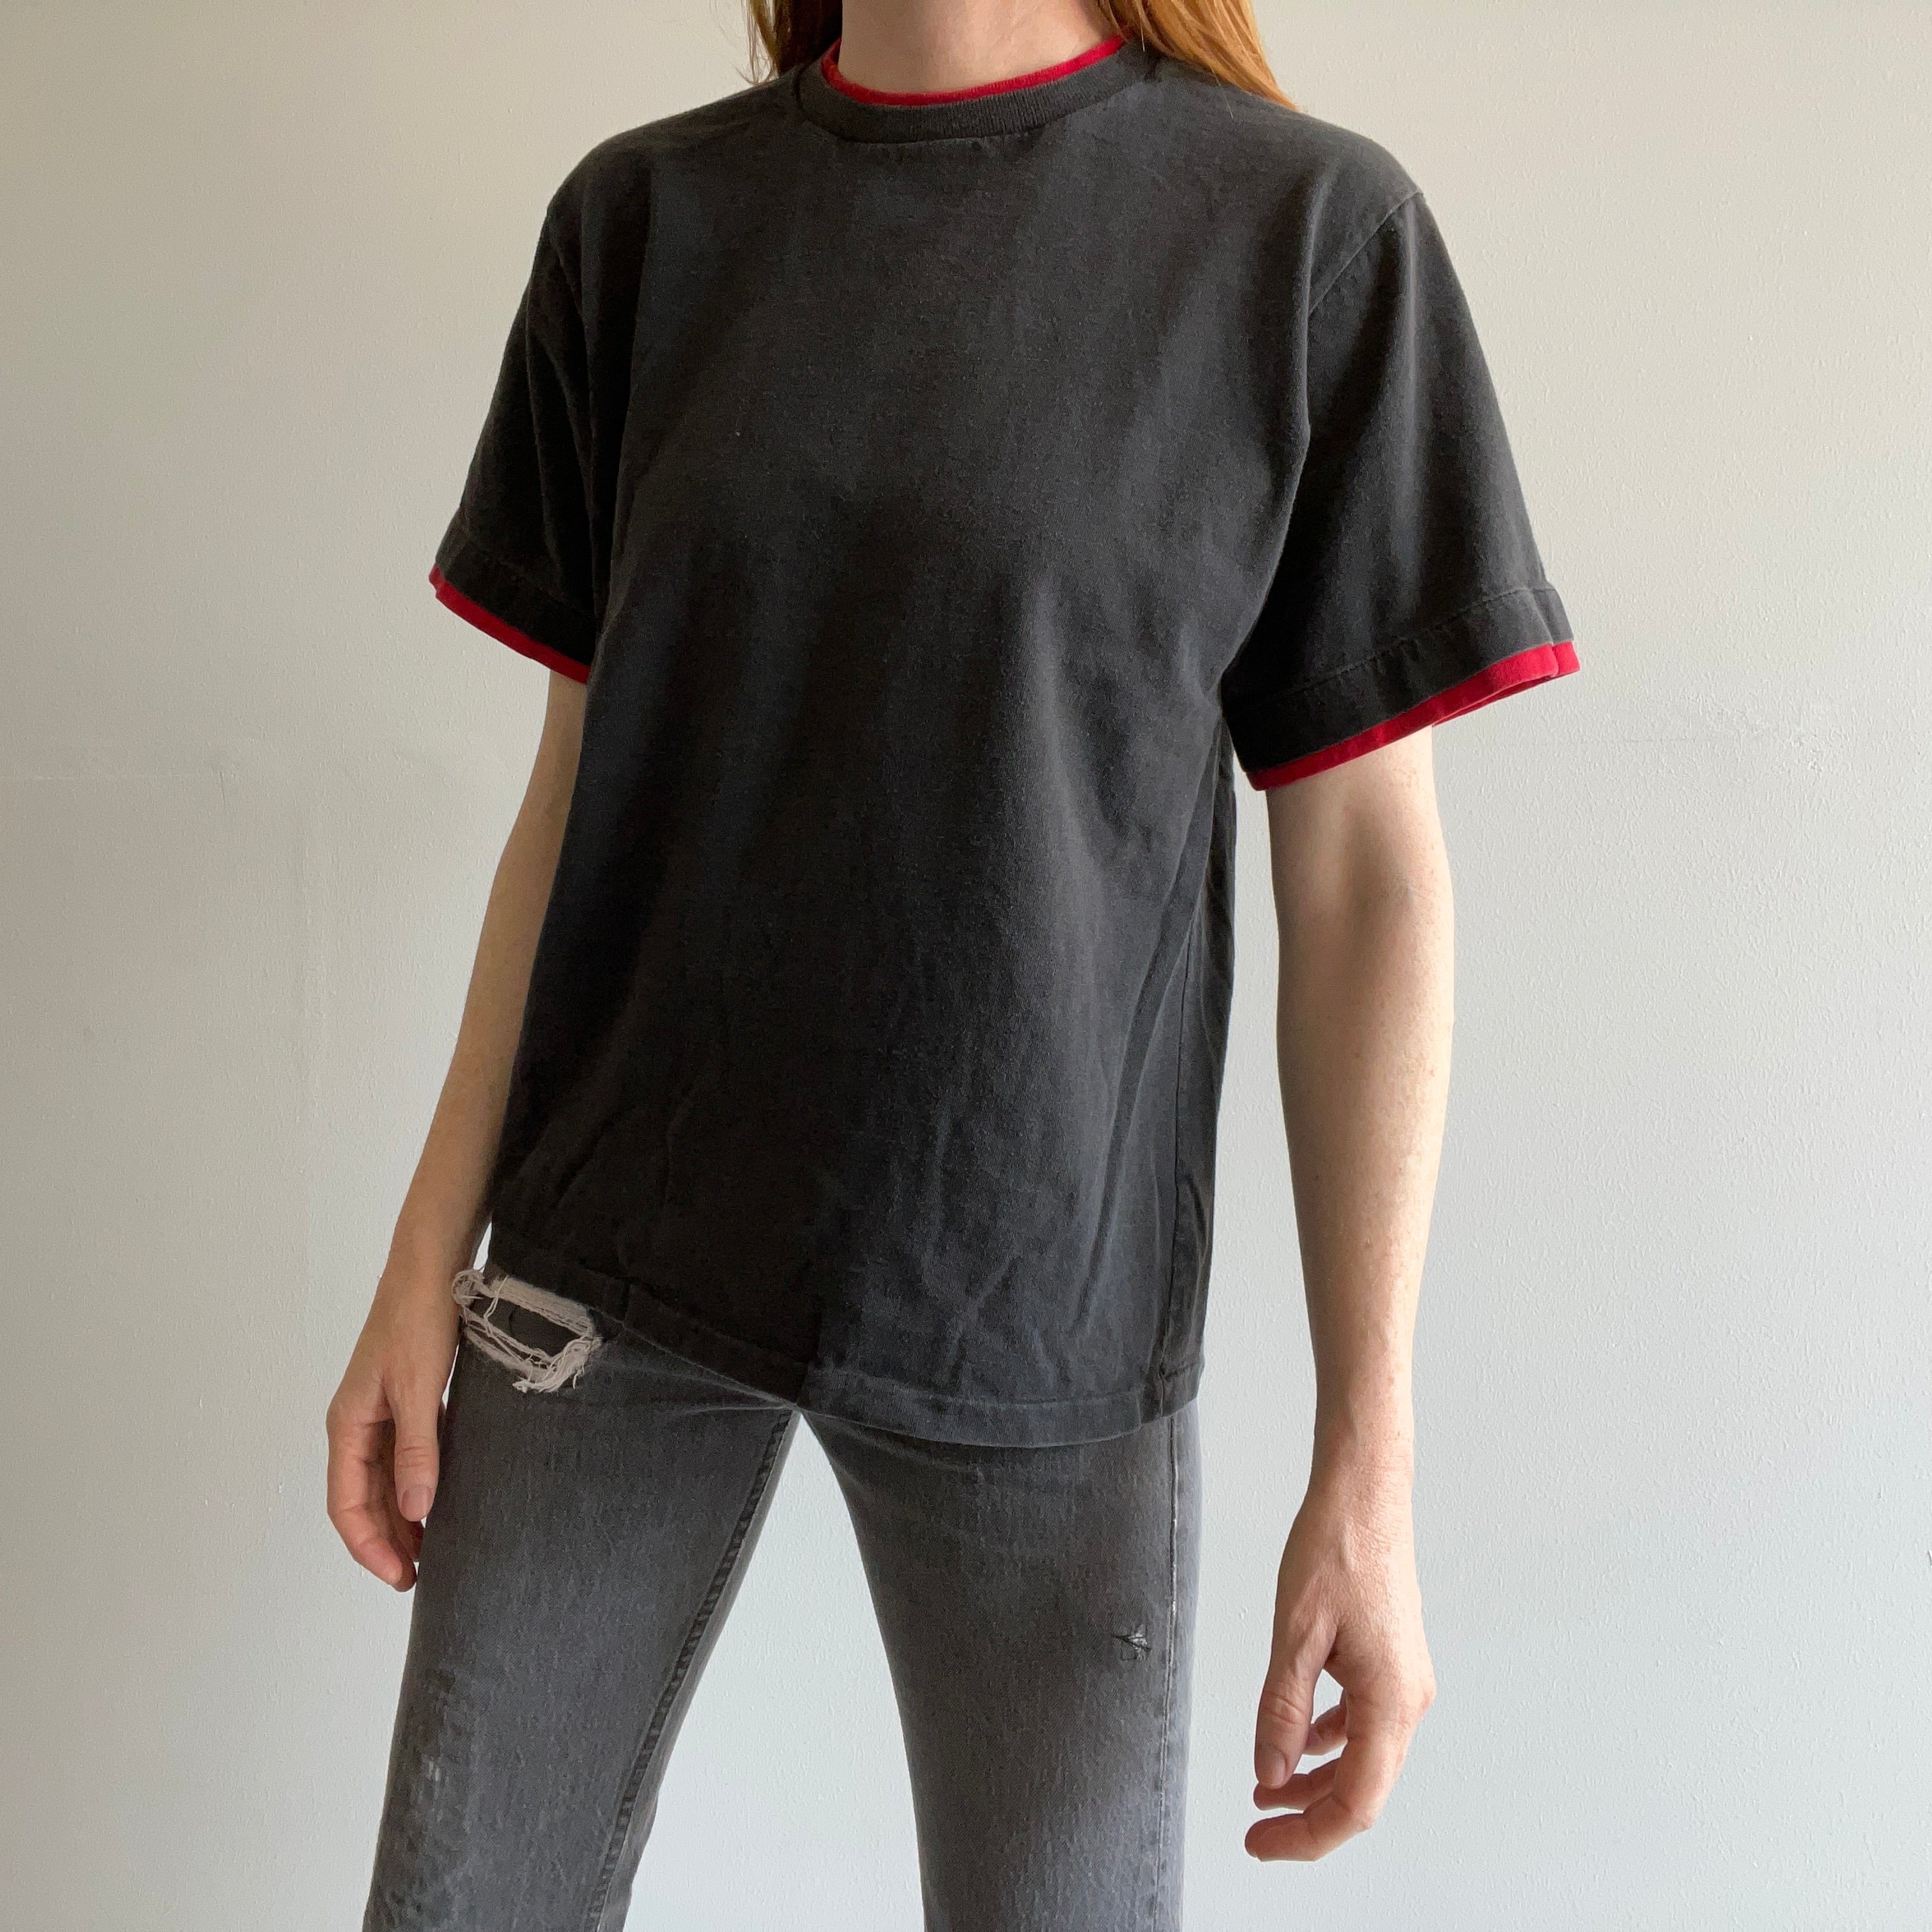 1980/90s Two Tone Black and Red Blank Cotton T-Shirt